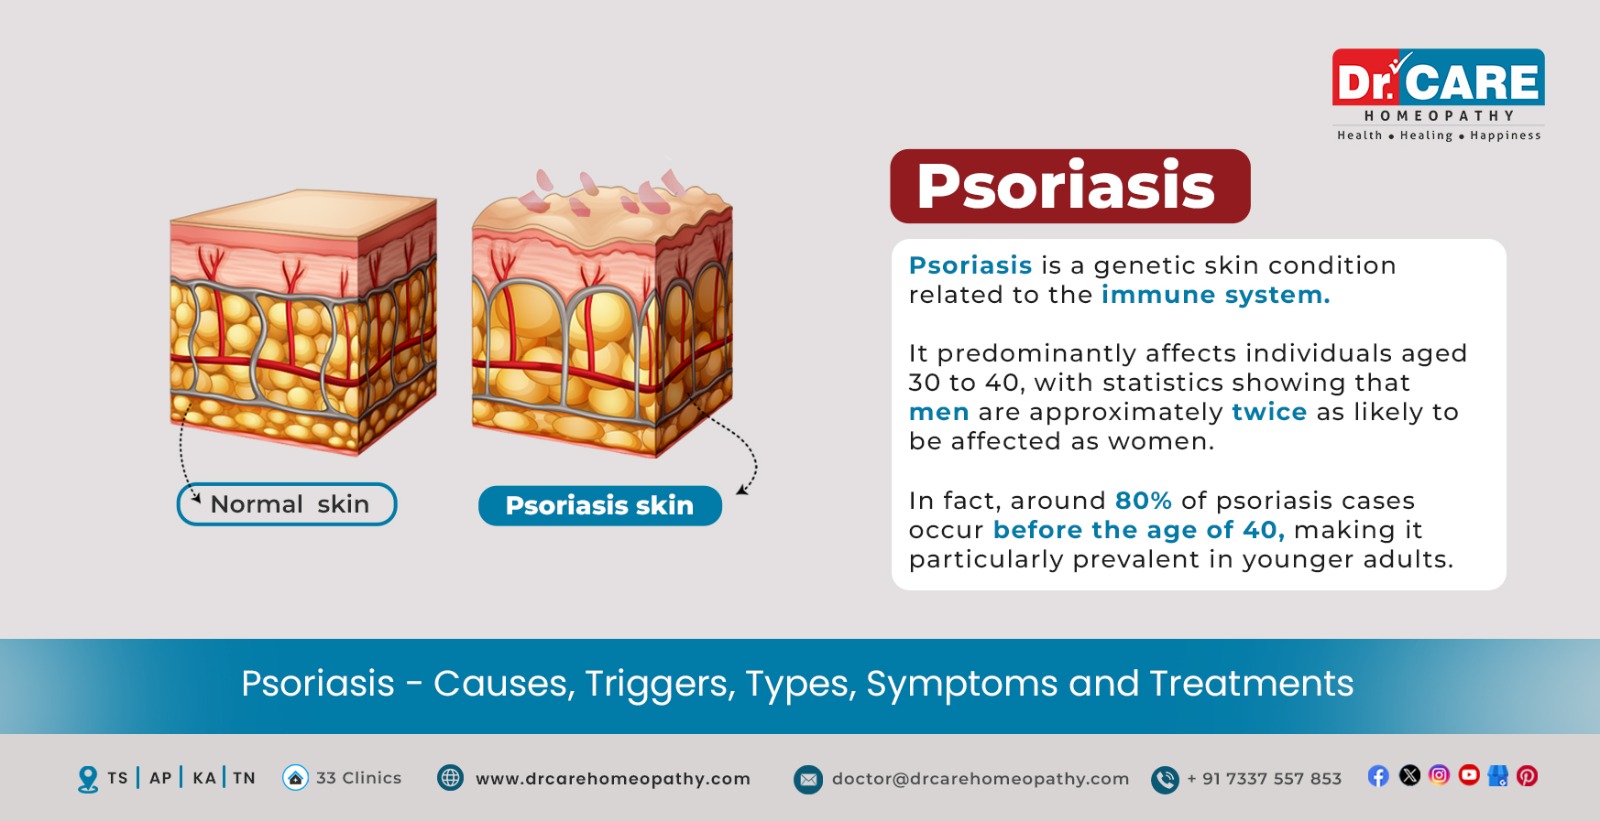 PsoriasisCauses Symptoms DifferencesandTreatment